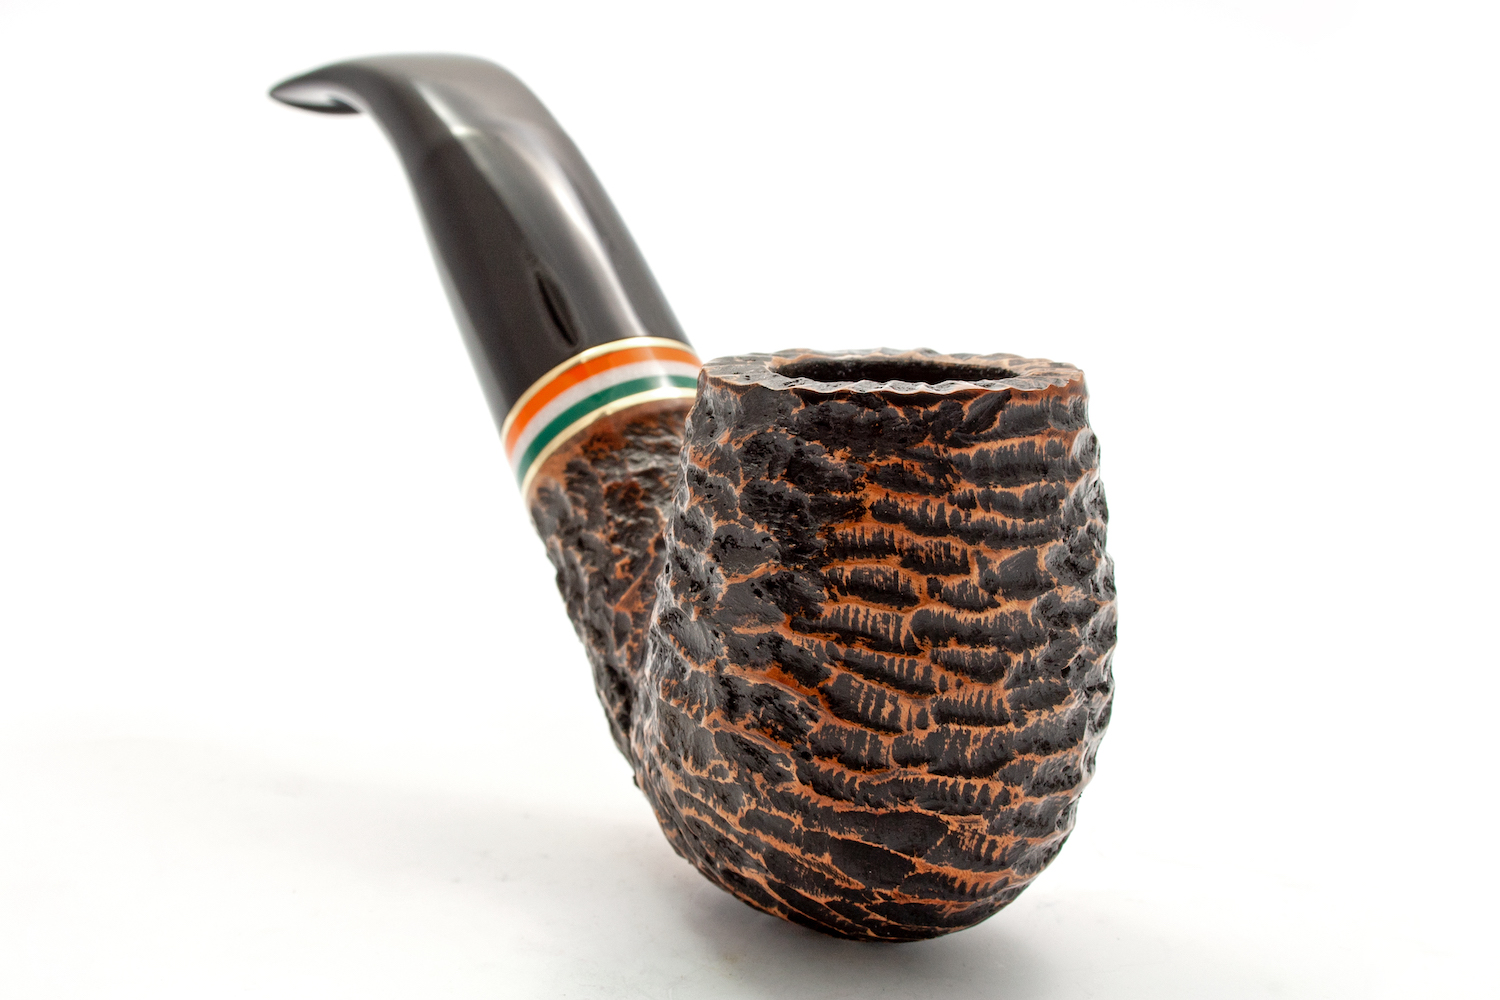 Peterson St. Patrick's Day 23 - XL90